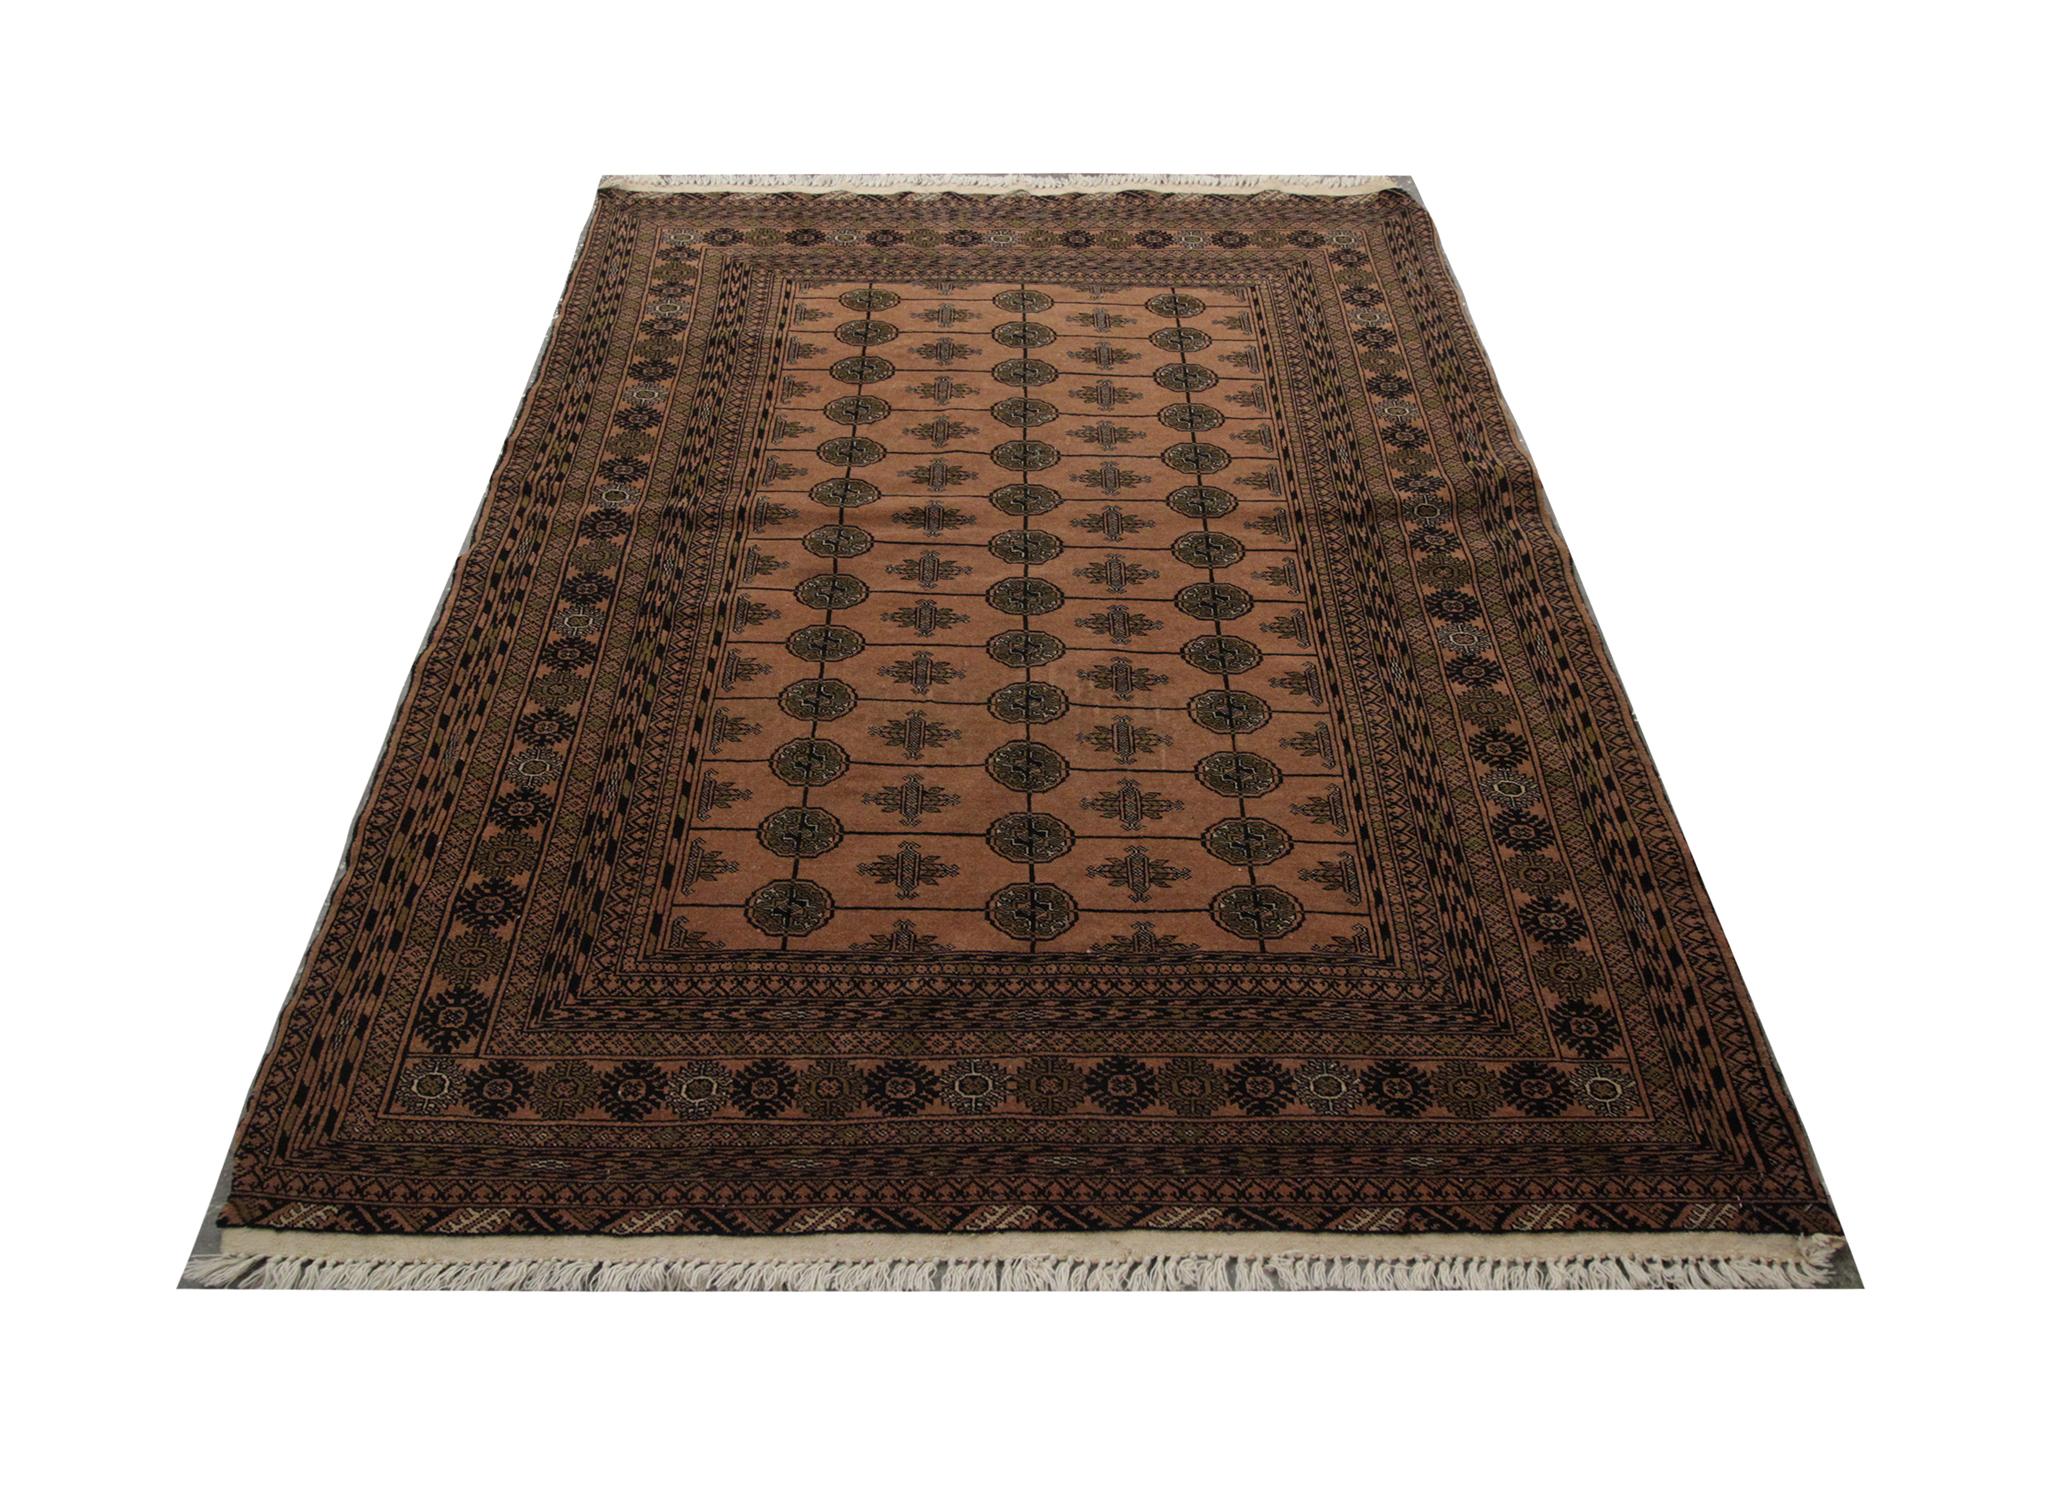 Handmade carpet Oriental rug minimal colors have been used in this Traditional Bokhara rug, brown is the main featured color with three rows of black octagonal motifs as the central design. This is supported by a highly-detailed multi-layered